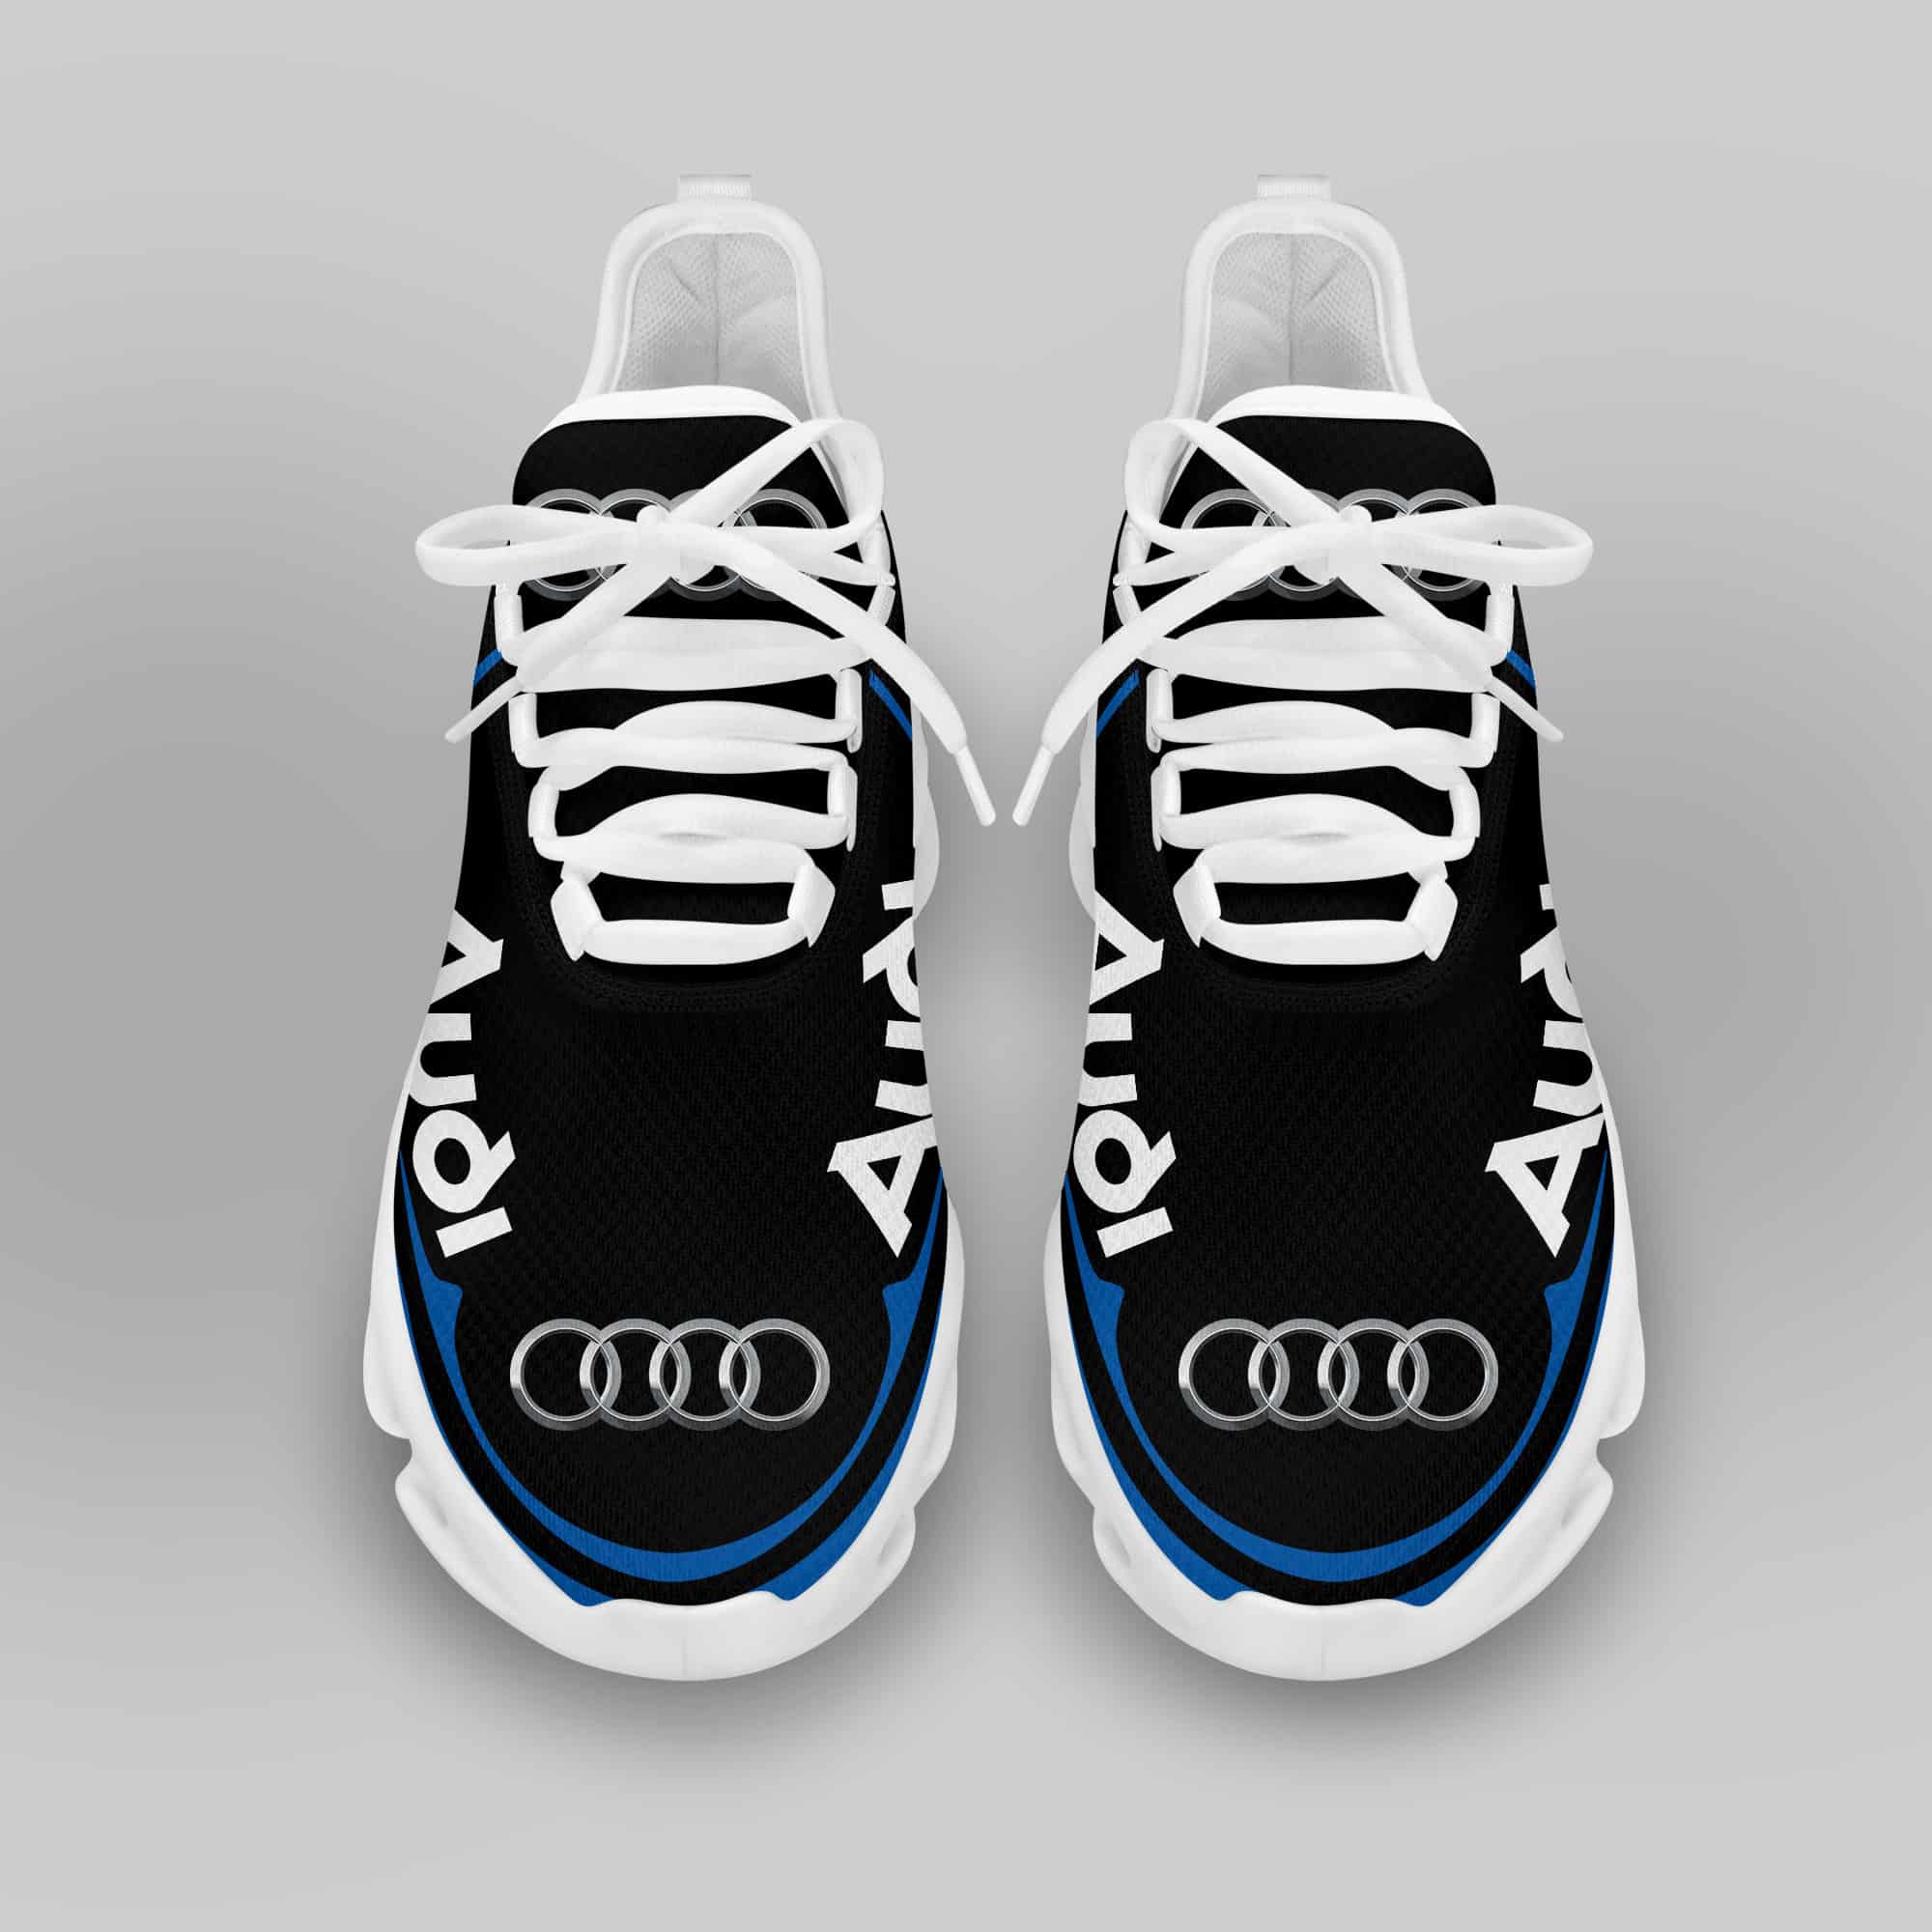 Audi Sport Running Shoes Max Soul Shoes Sneakers Ver 44 3